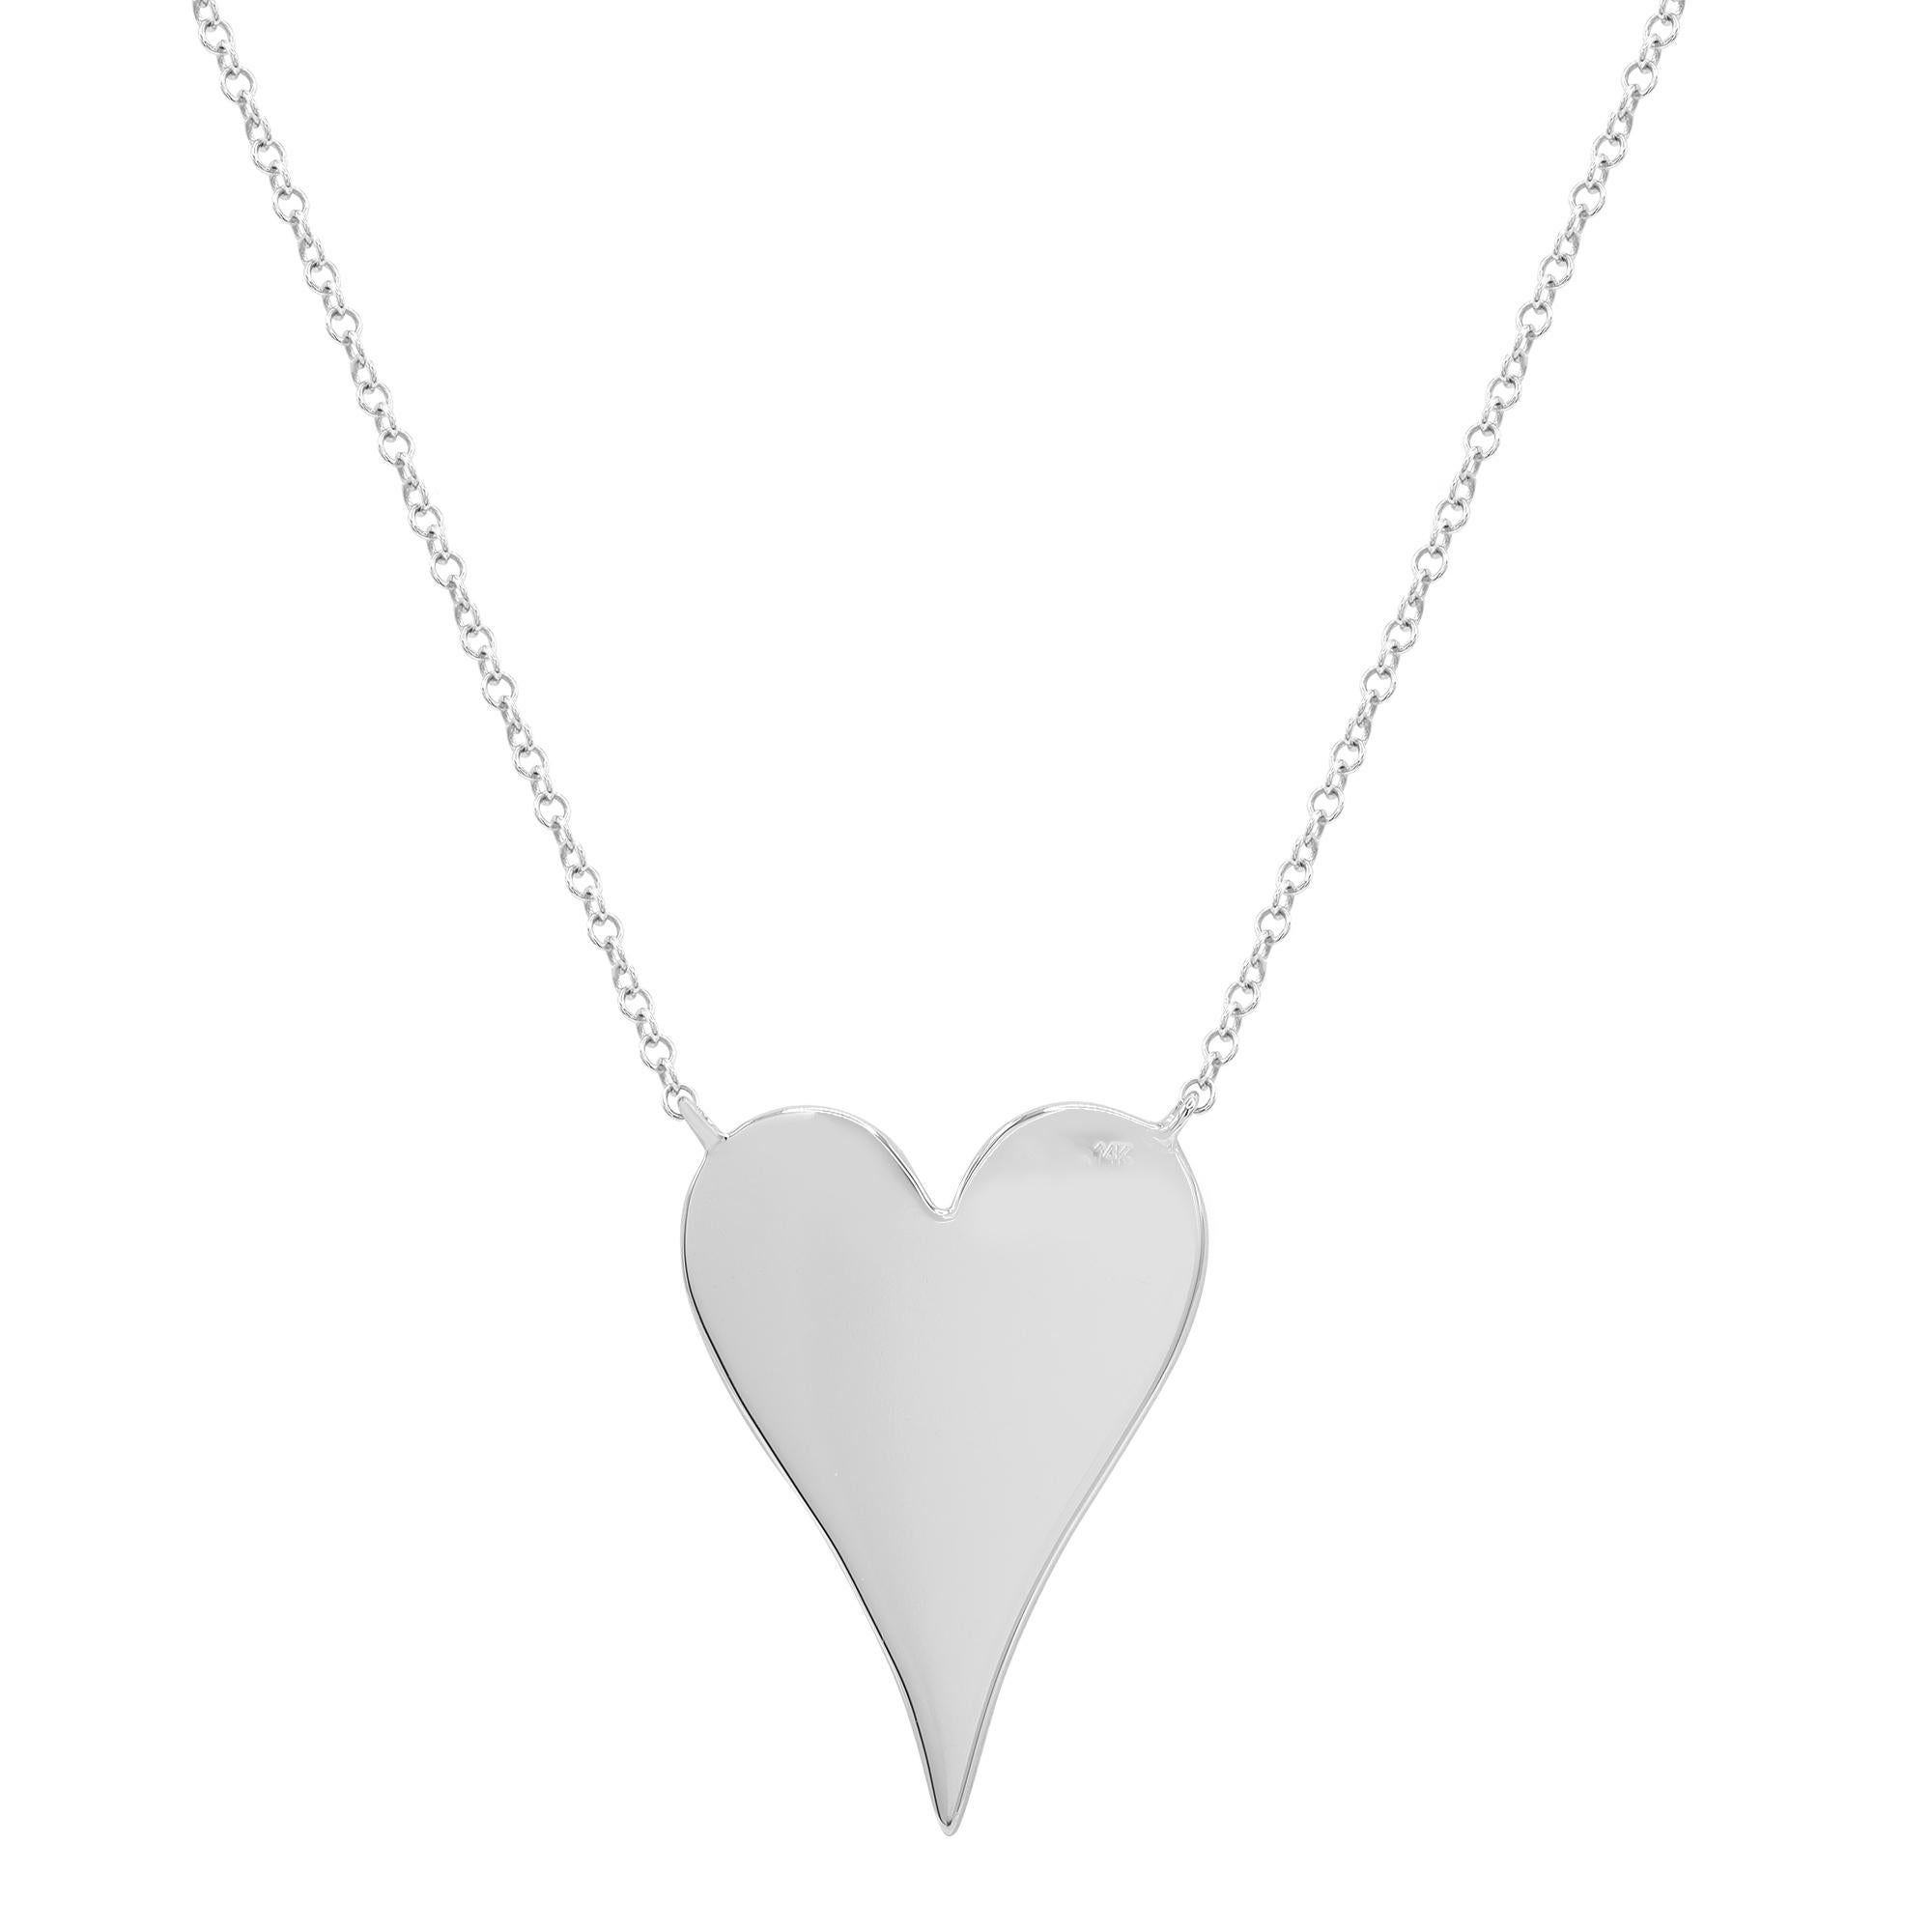 Trendy jewelry with real gold and real diamonds. This beautiful, delicate and precious diamond necklace will leave everyone speechless the moment they see it. Crafted in high polished solid 14k white gold. The heart is set with tiny brilliant round